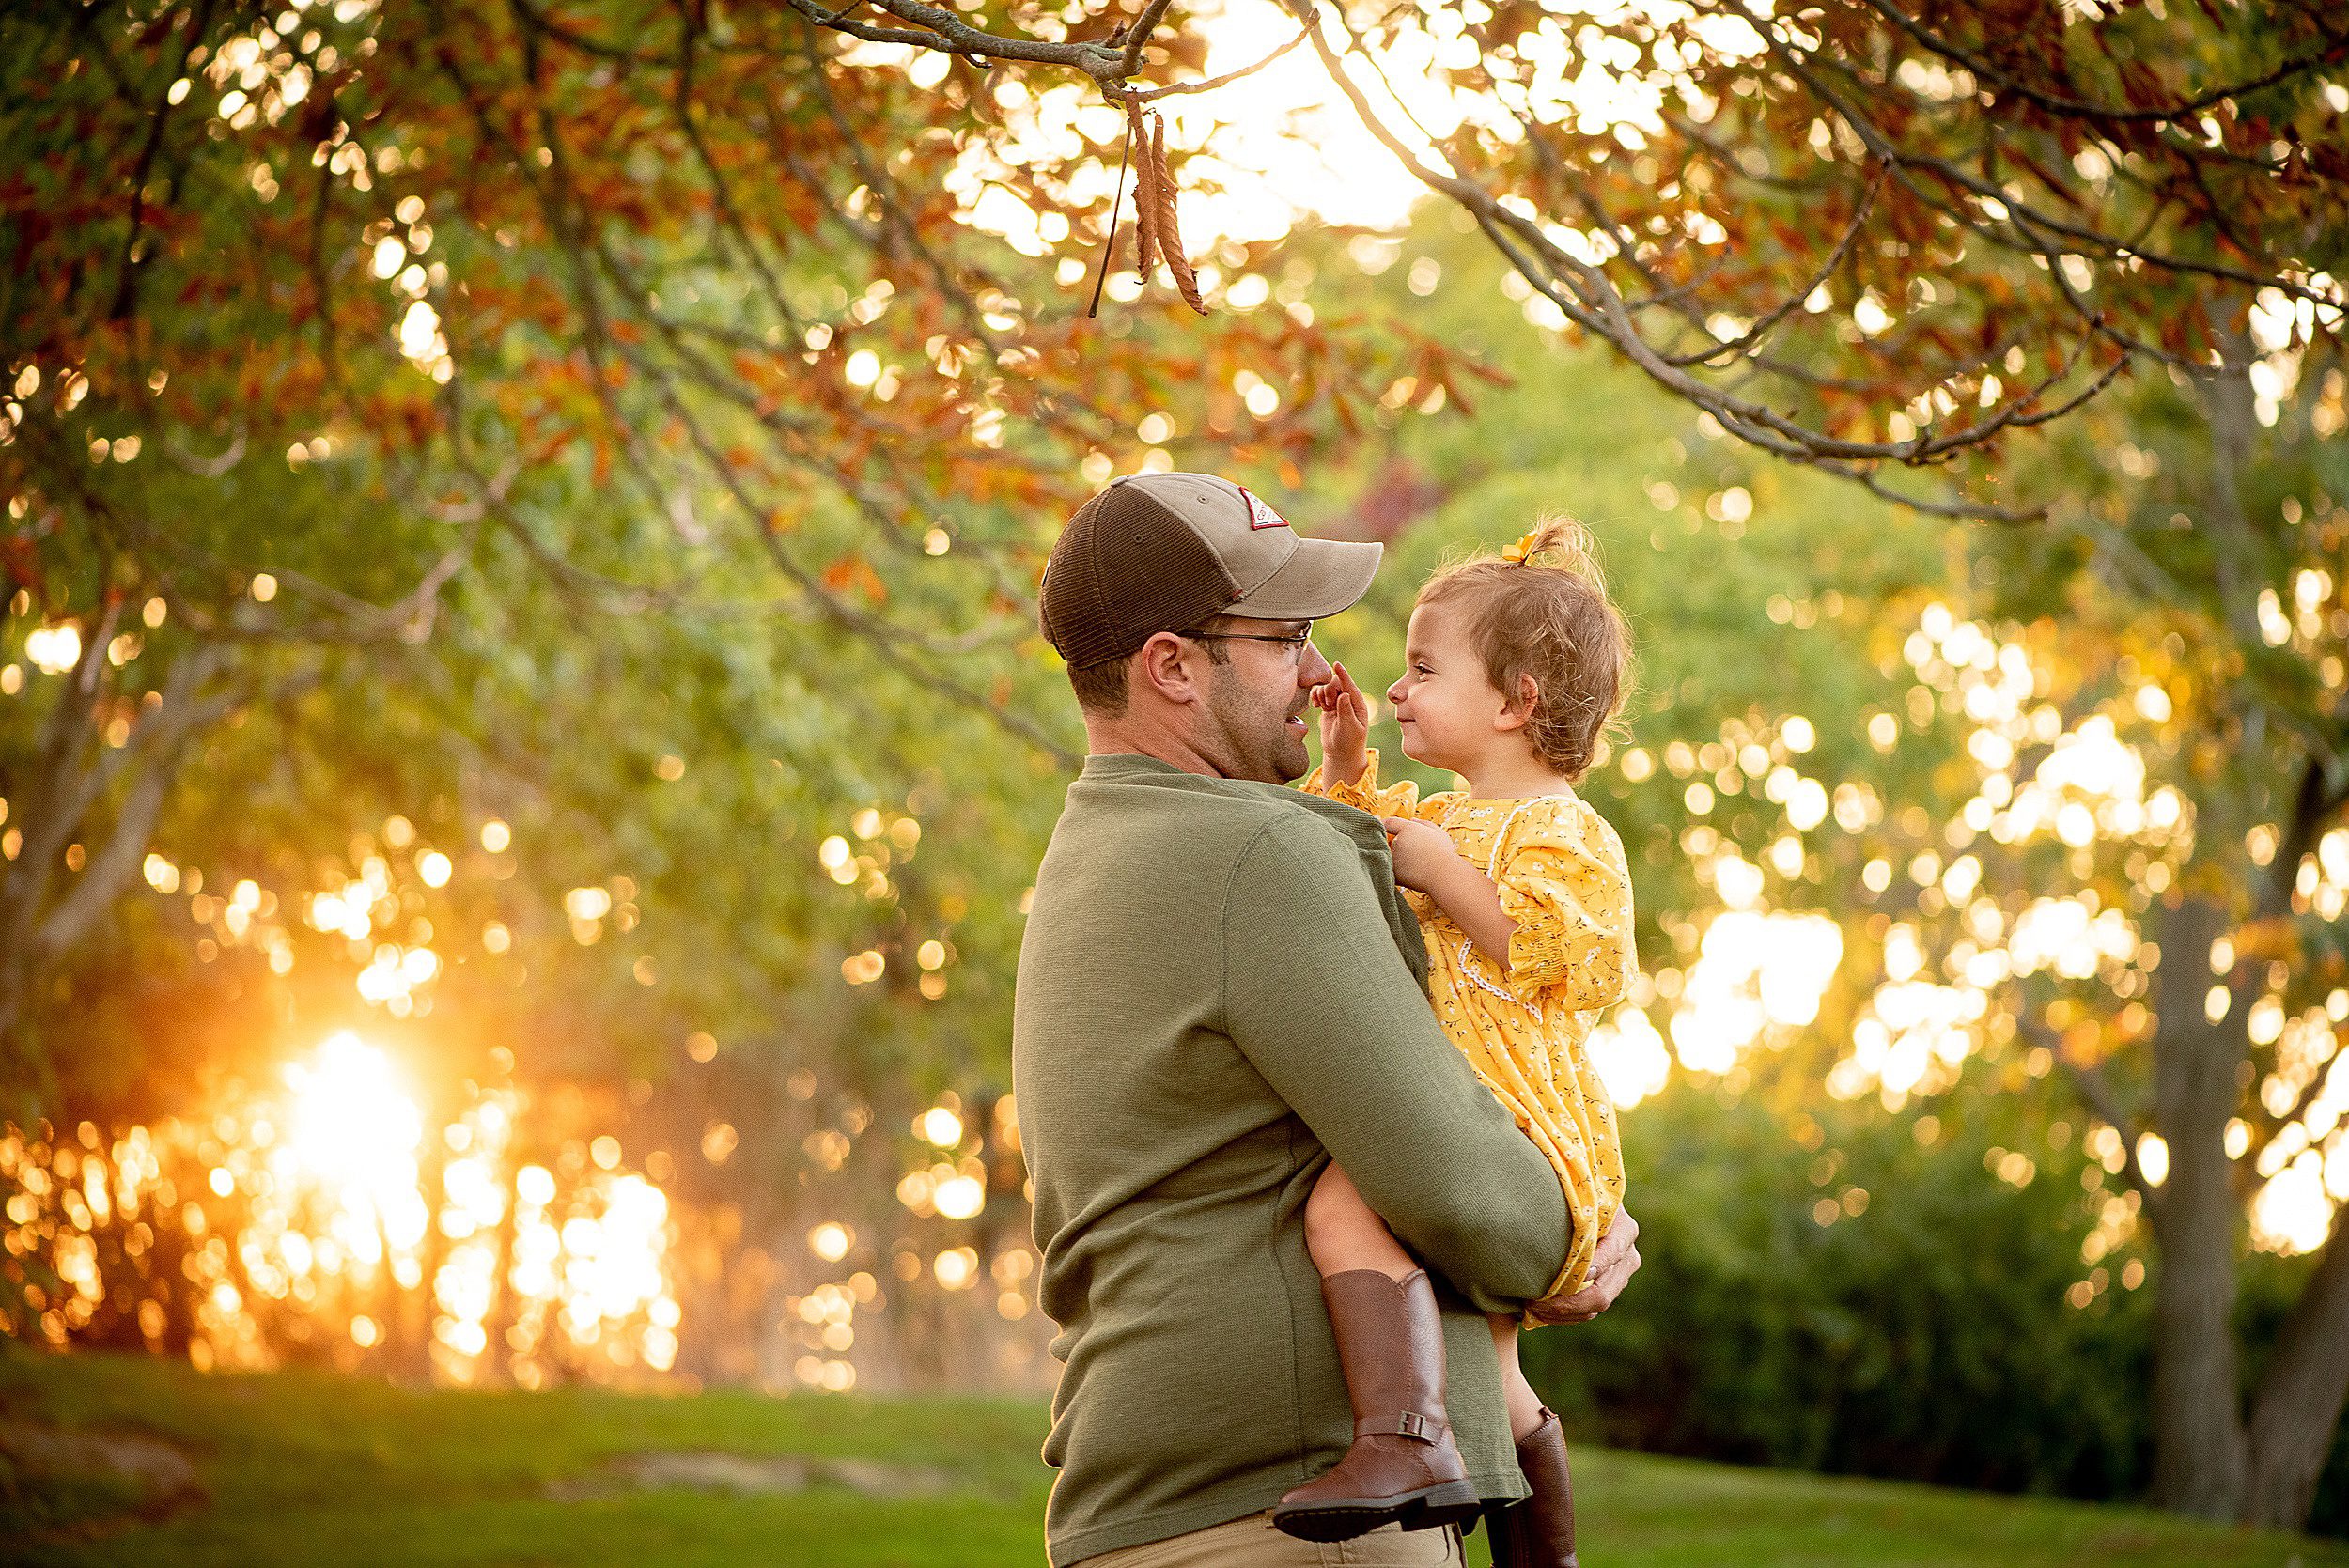 A father in a green shirt stands in a park in fall playing with his toddler daughter in a yellow dress at sunset new haven photographer